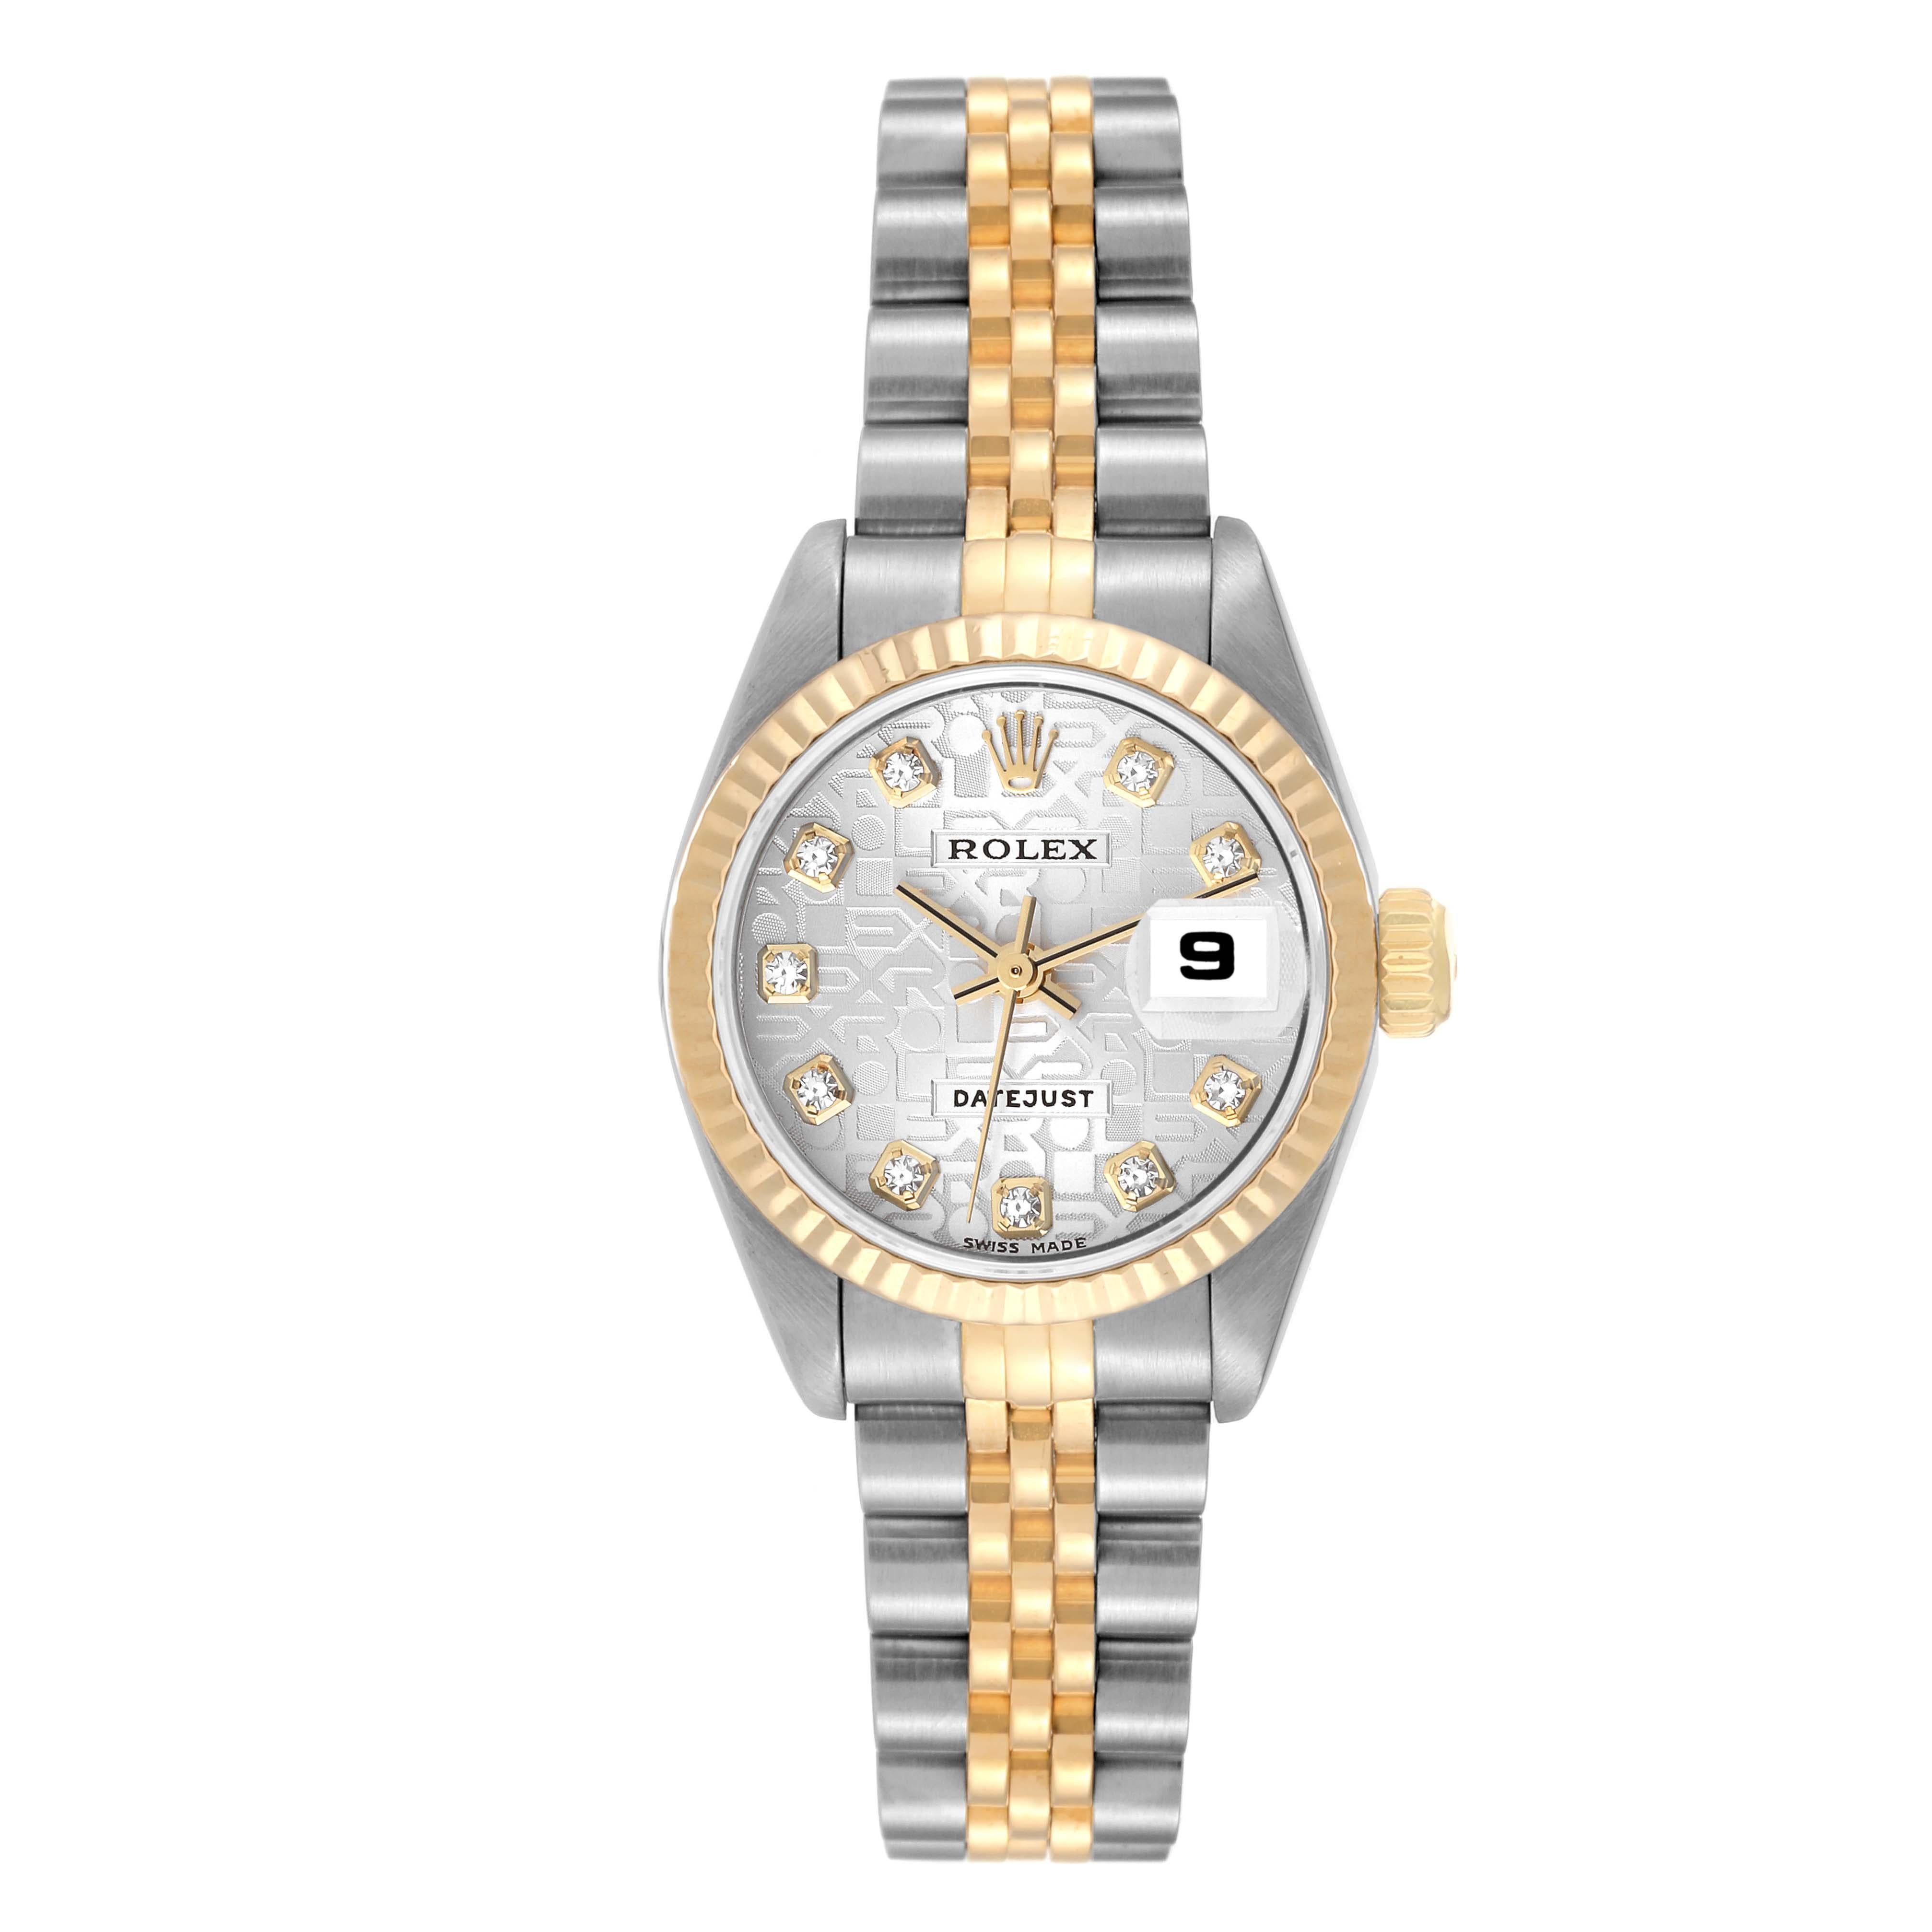 Rolex Datejust Steel Yellow Gold Anniversary Diamond Dial Ladies Watch 79173. Officially certified chronometer automatic self-winding movement. Stainless steel oyster case 26.0 mm in diameter. Rolex logo on an 18K yellow gold crown. 18k yellow gold